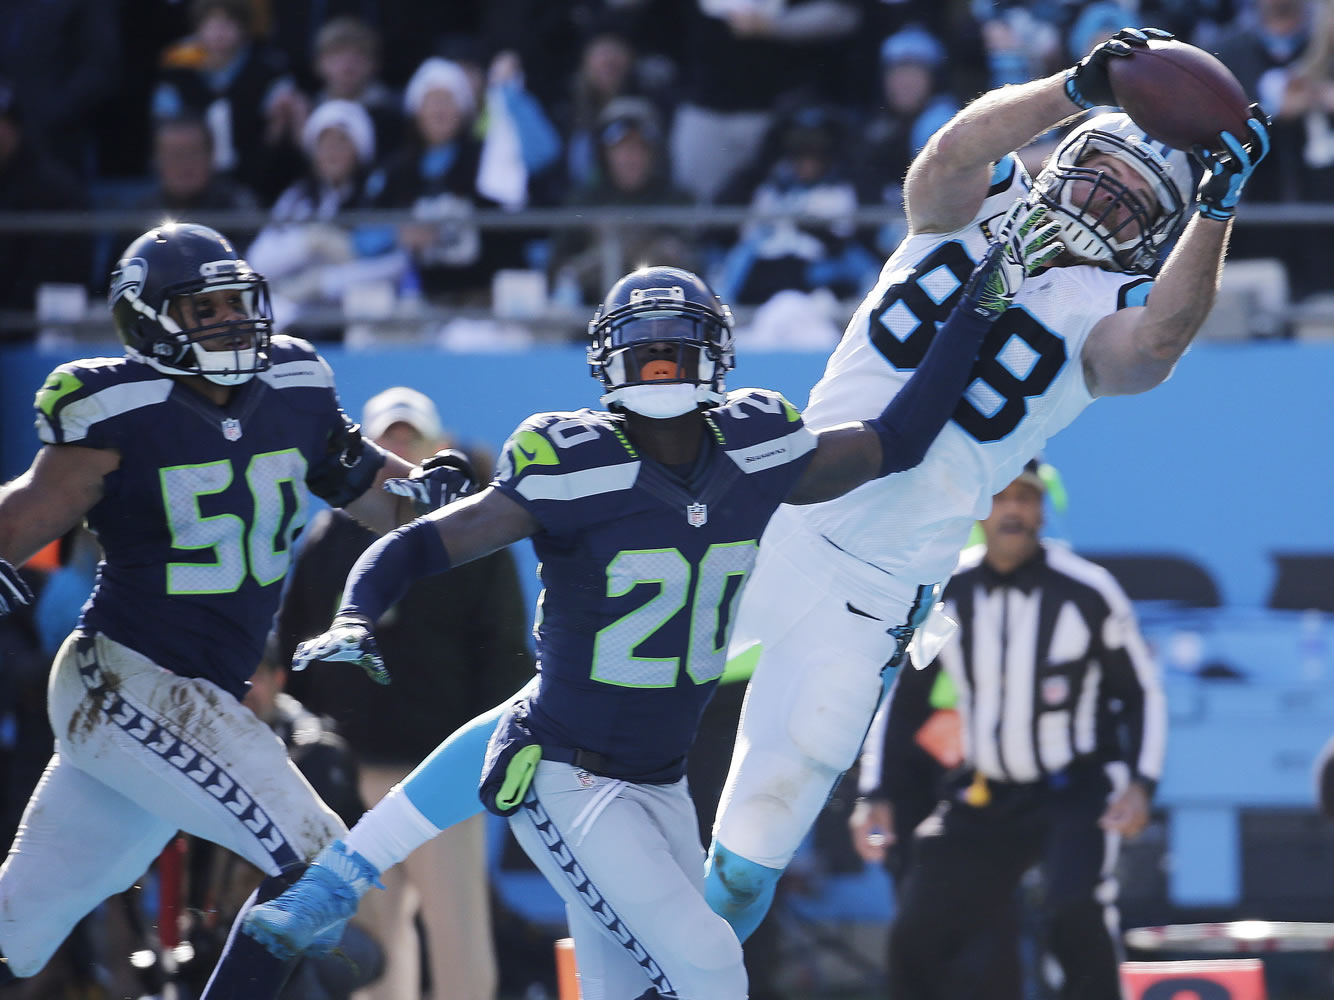 Carolina Panthers tight end Greg Olsen (88) makes a touchdown catch against Seattle Seahawks cornerback Jeremy Lane (20) during the first half of an NFL divisional playoff football game, Sunday, Jan. 17, 2016, in Charlotte, N.C.